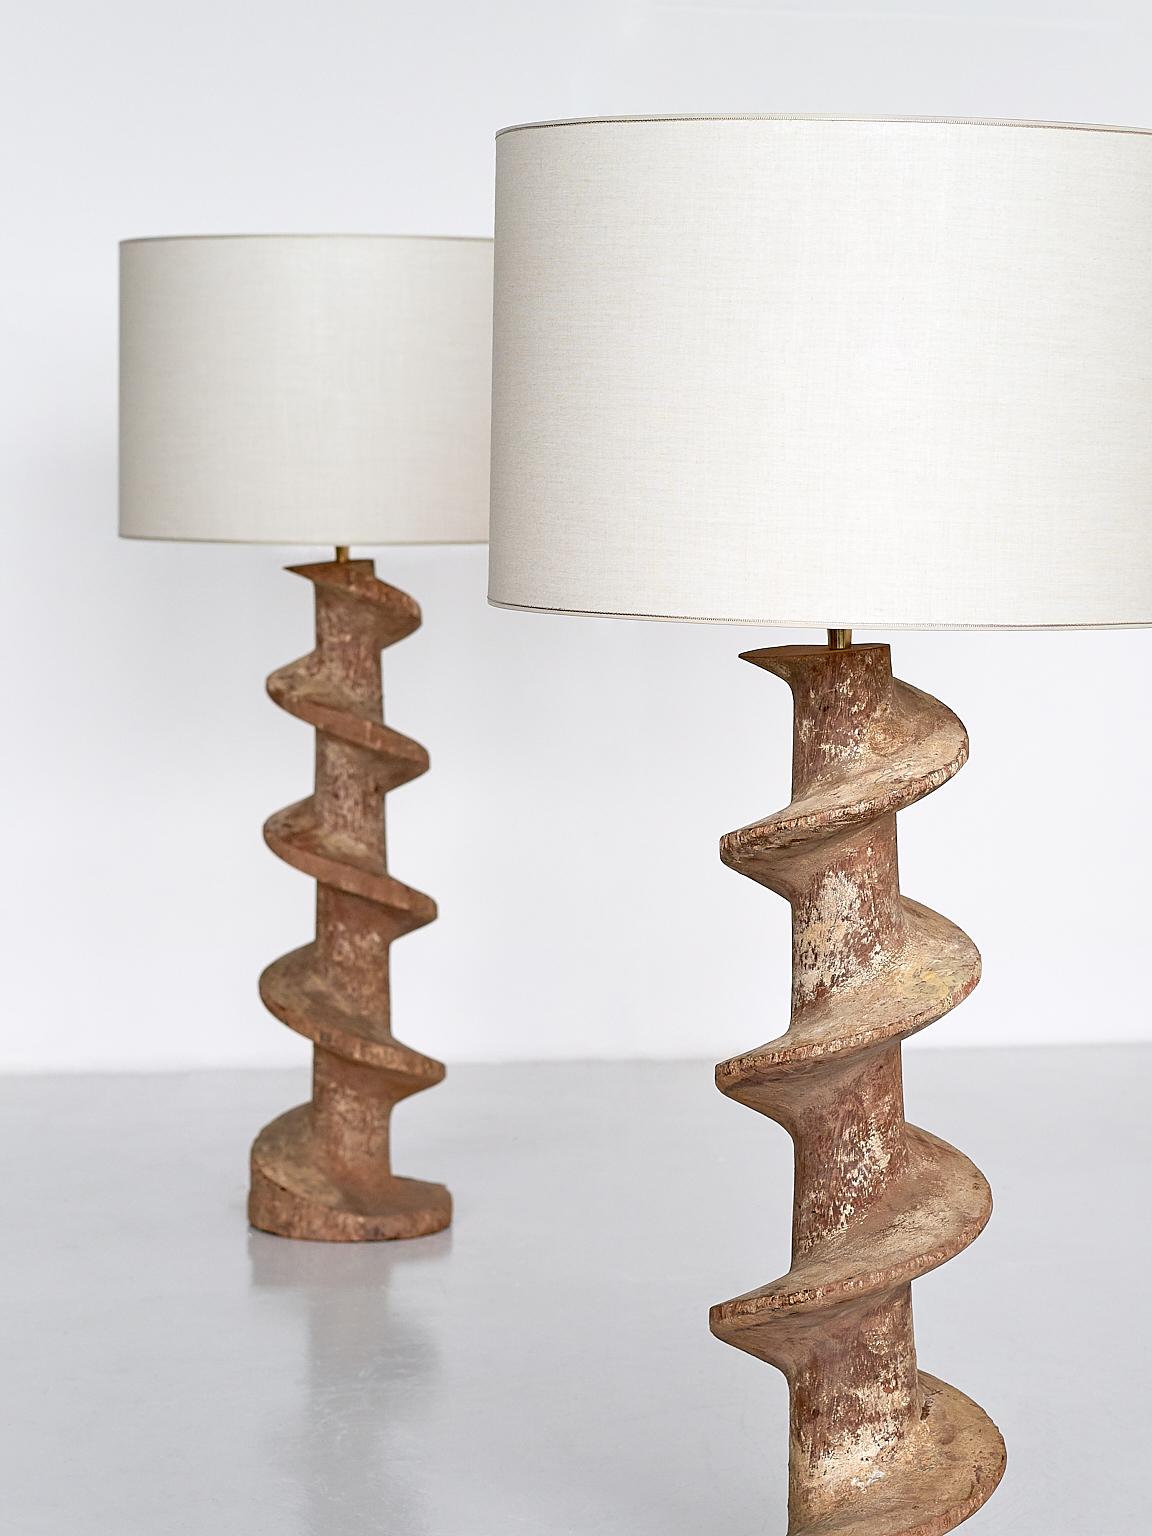 Fabric Pair of Table Lamps with Wooden Spiral Screw Base, Belgium, Late 19th Century